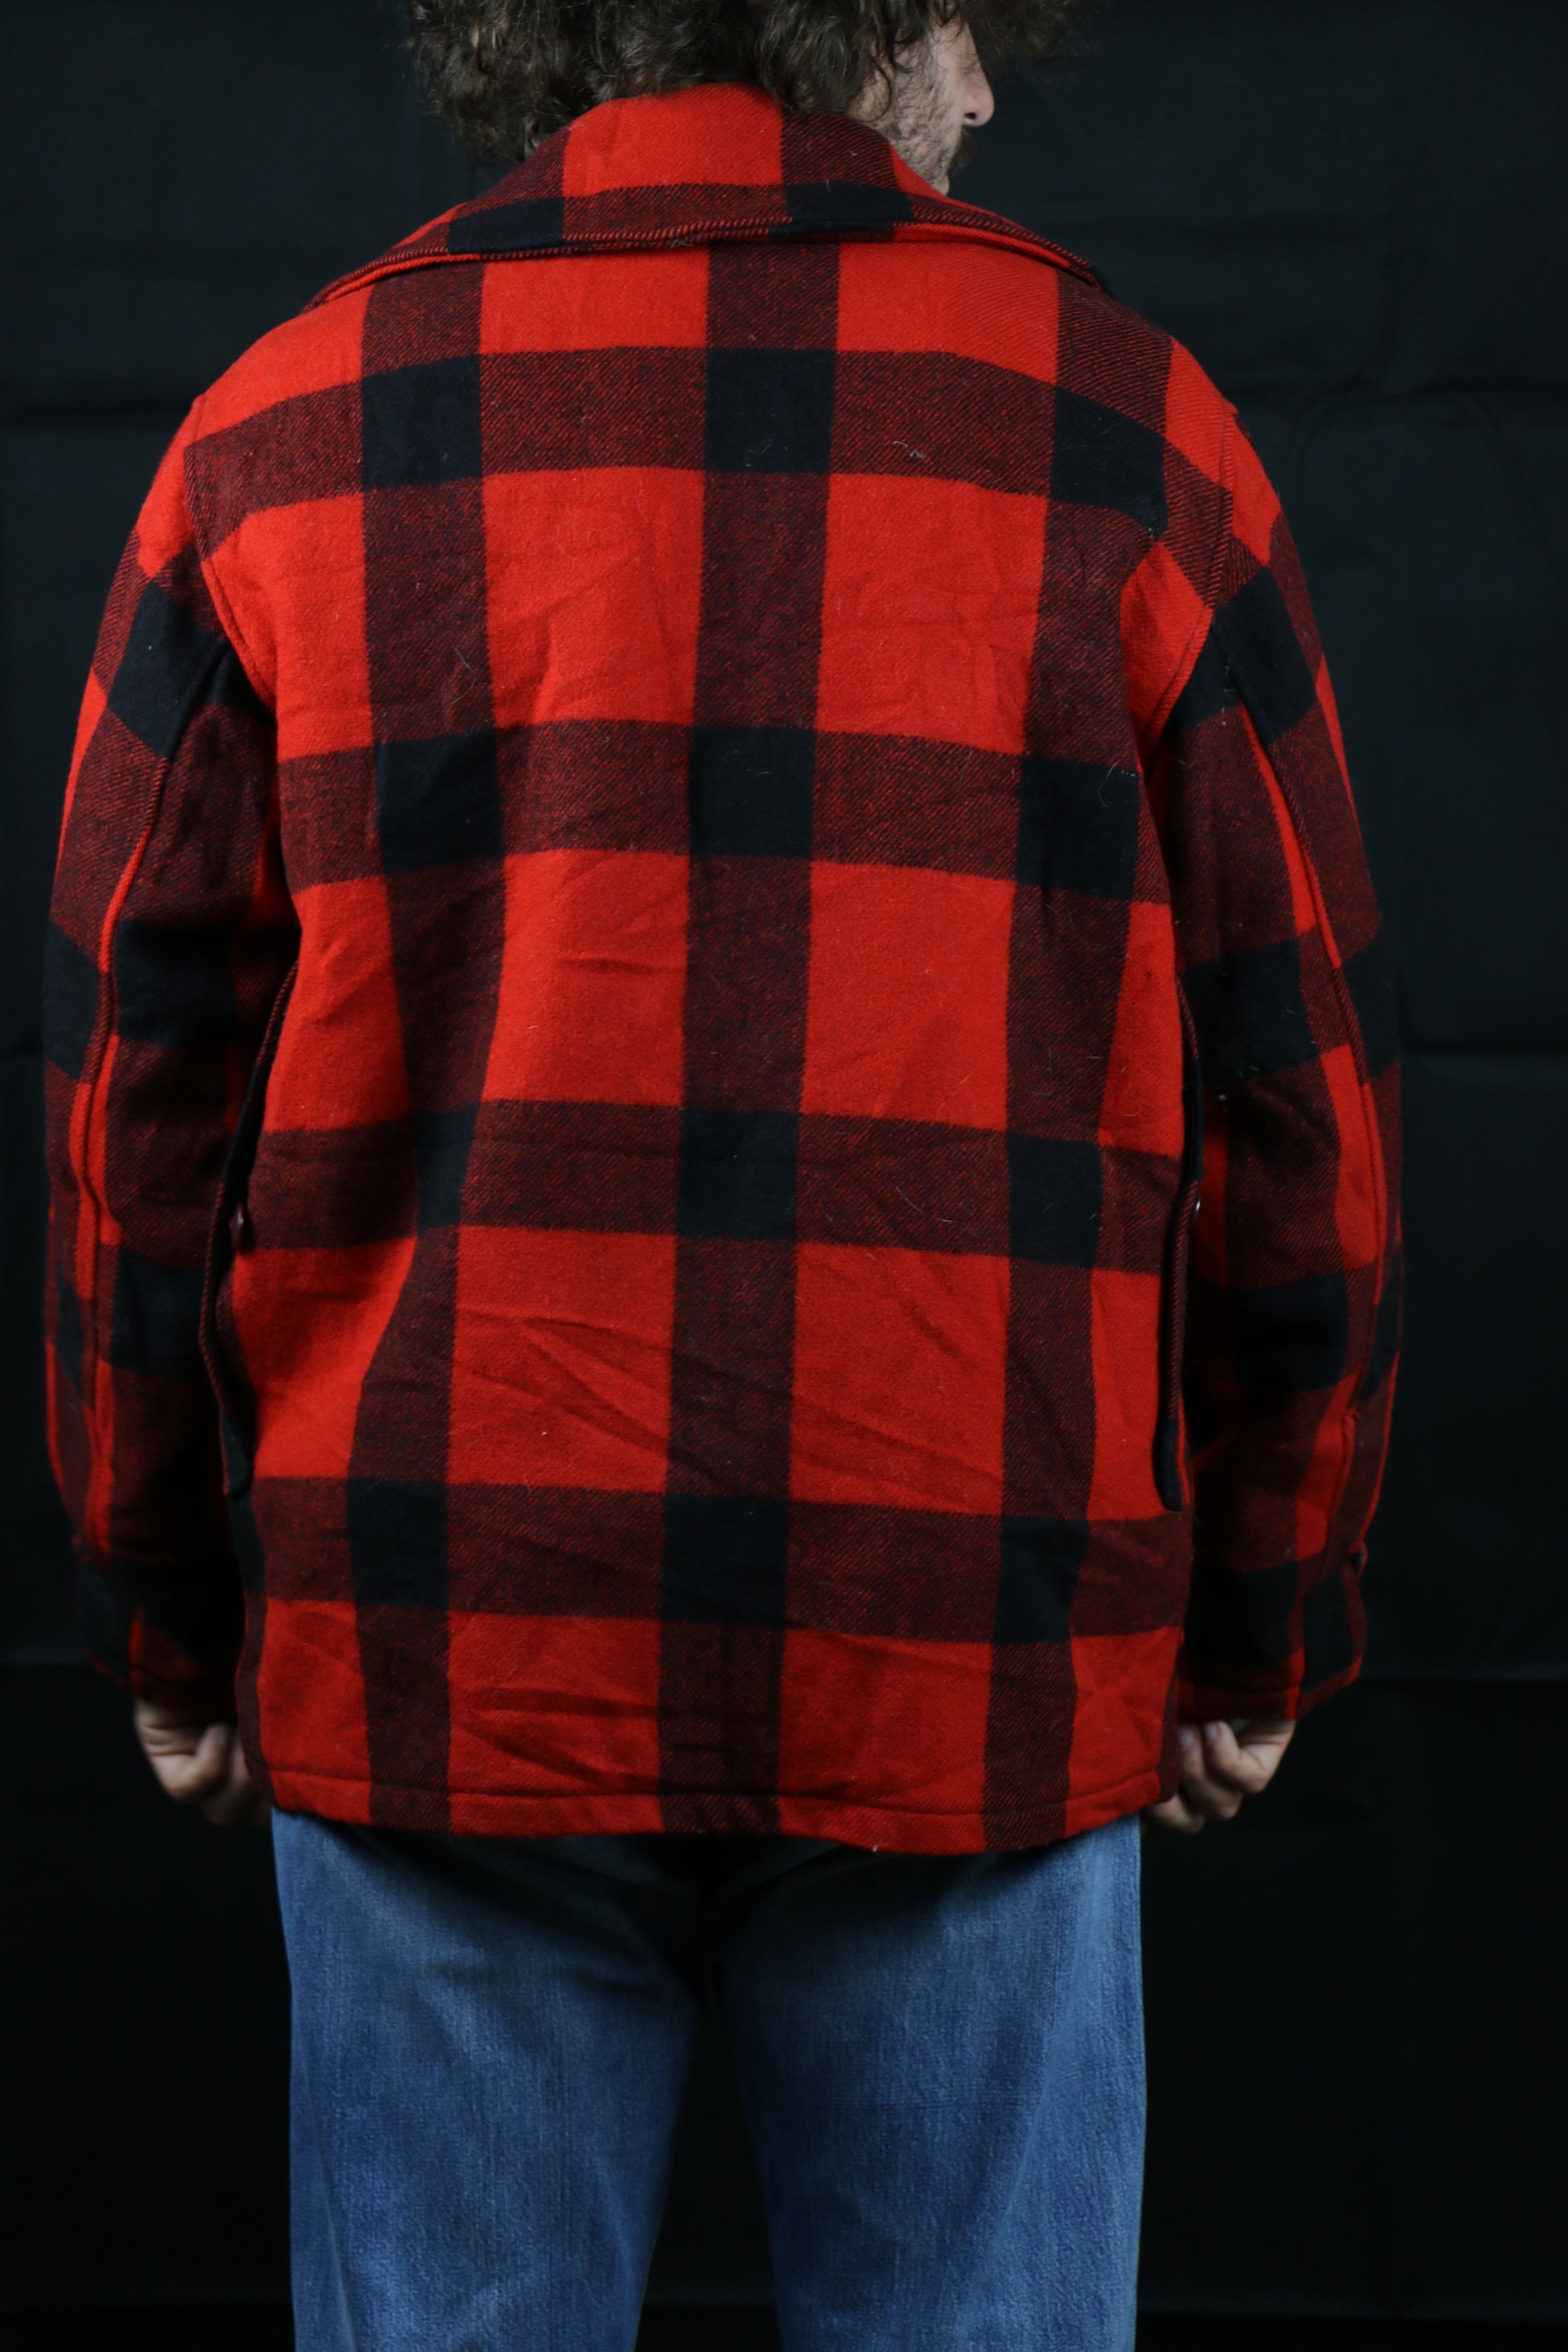 Woolrich Red and Black Plaid Jacket 50s, clochard92.com